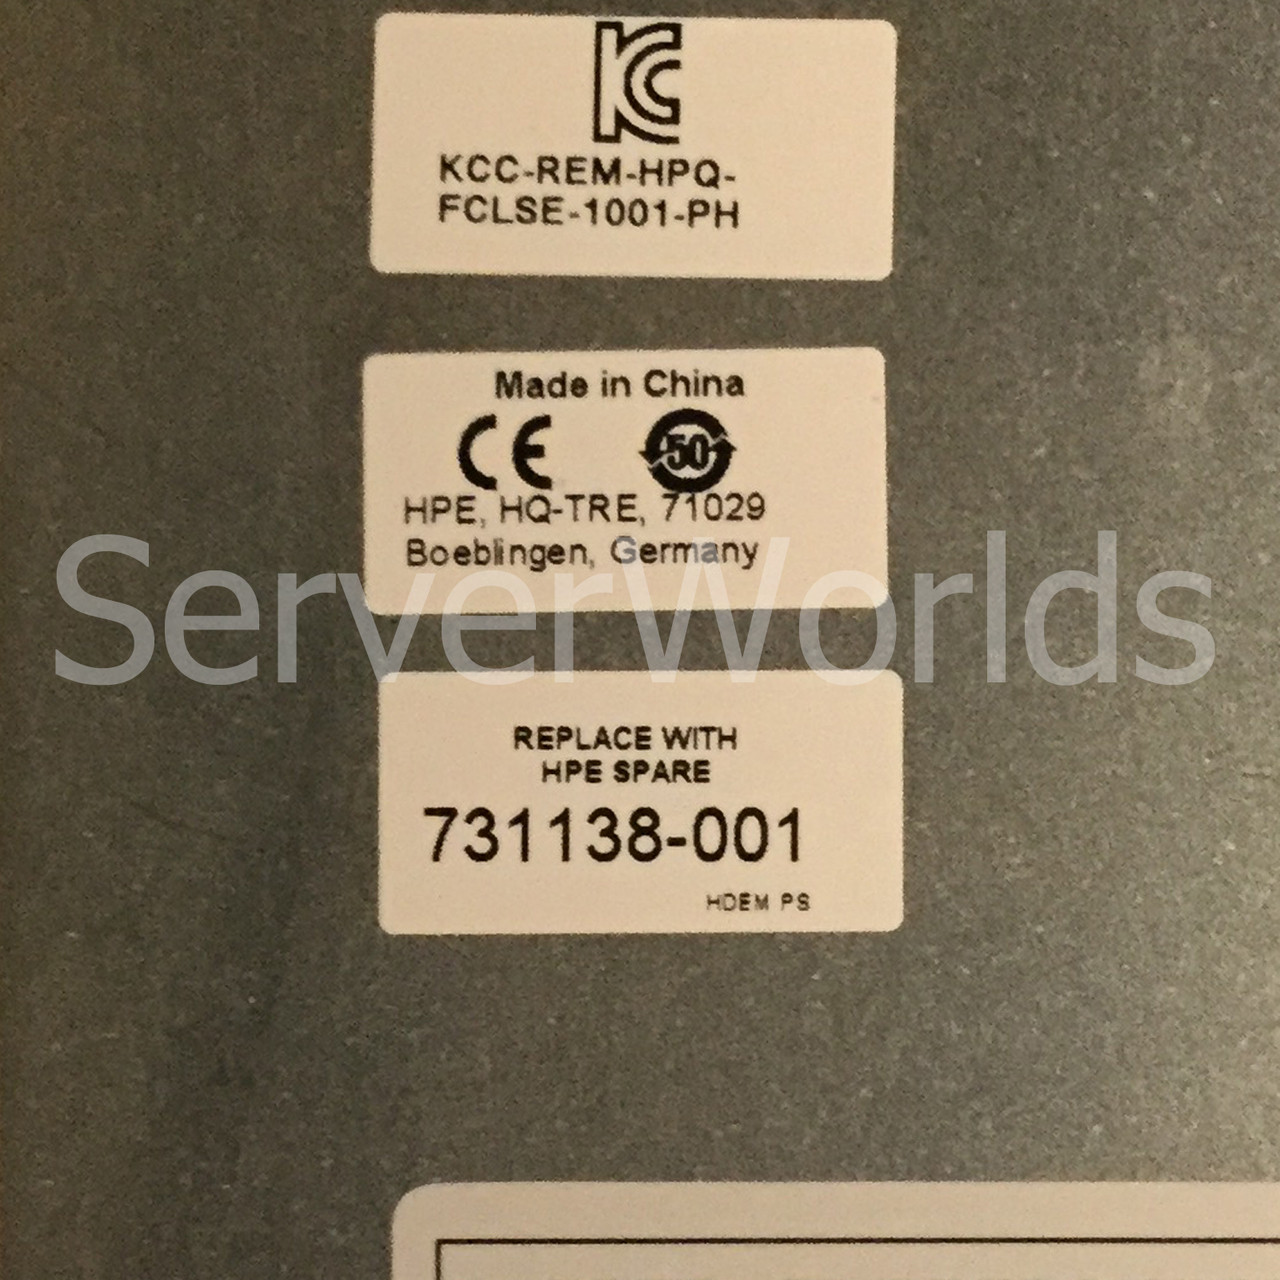 Refurbished HP 731138-001 350W Expansion Module Power Supply 3-02742-13 Product Label